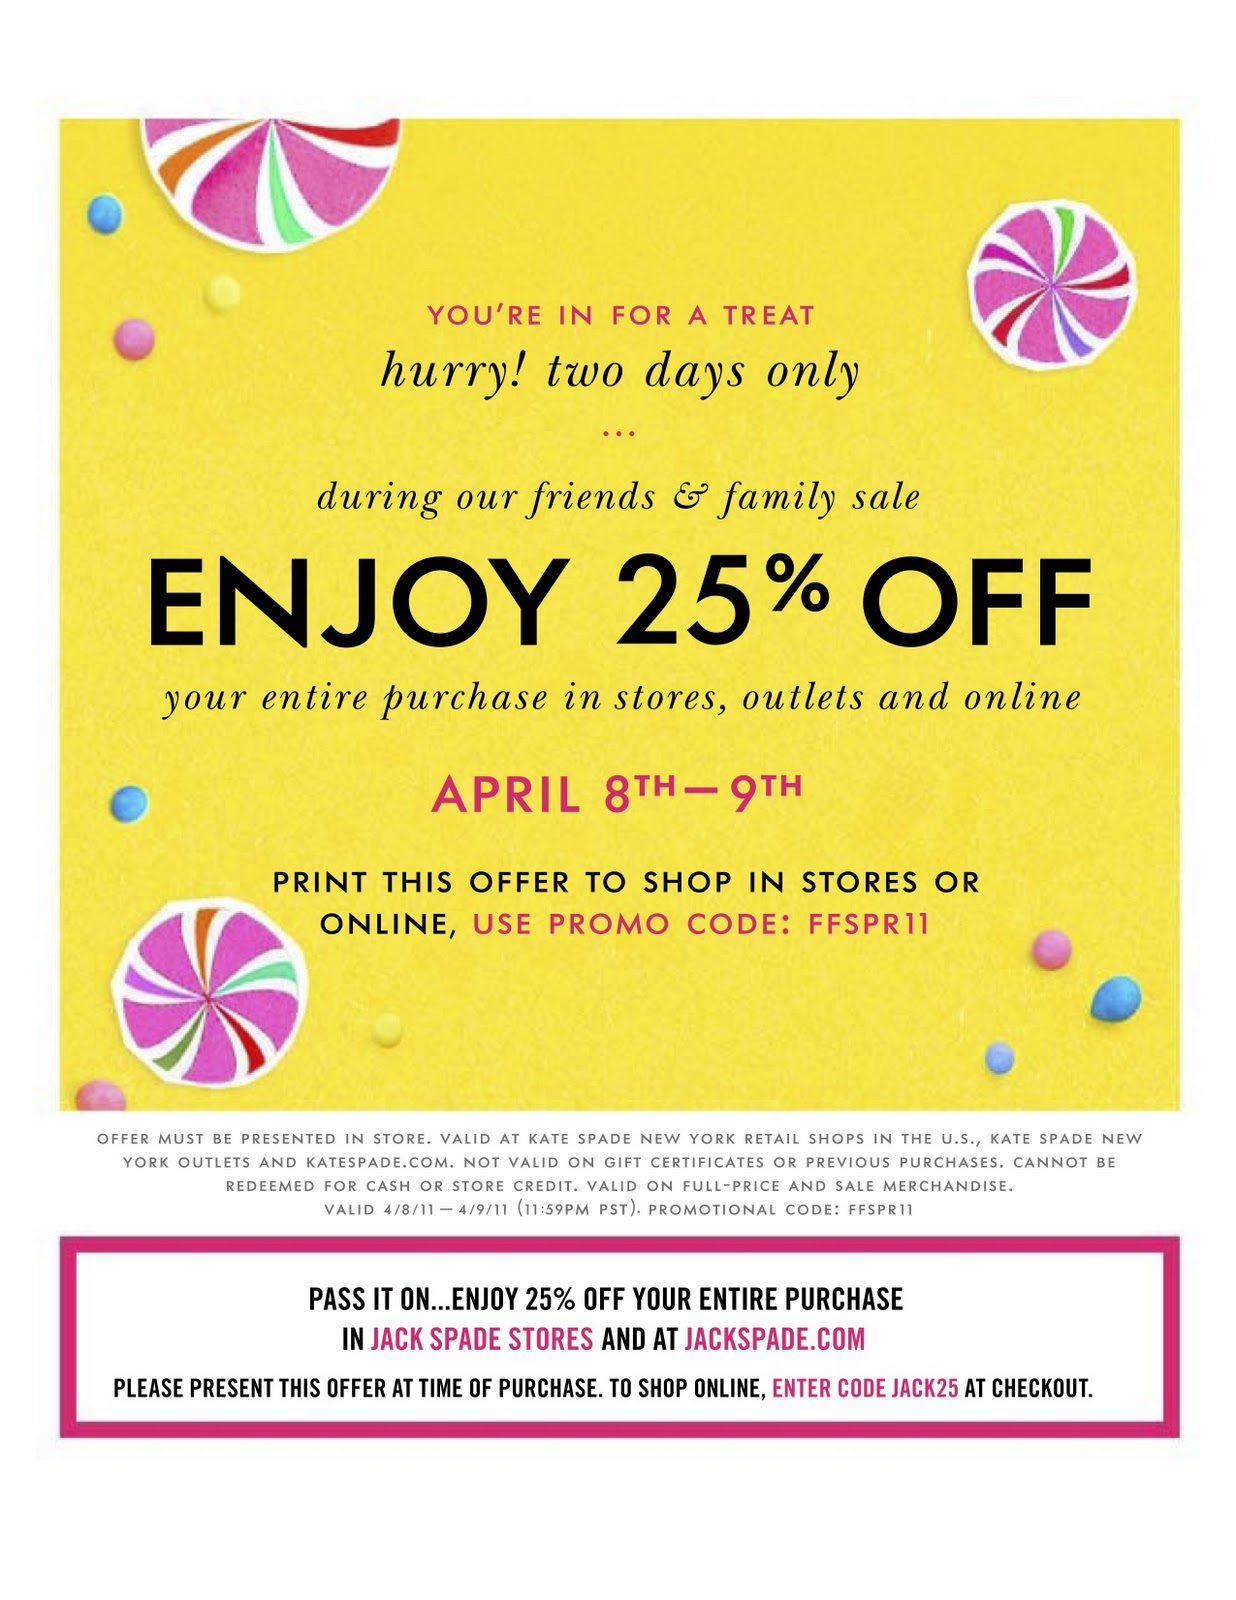 FFF - ASOS 20% discount, Kate Spade Friends & Family, and pepper crab ...